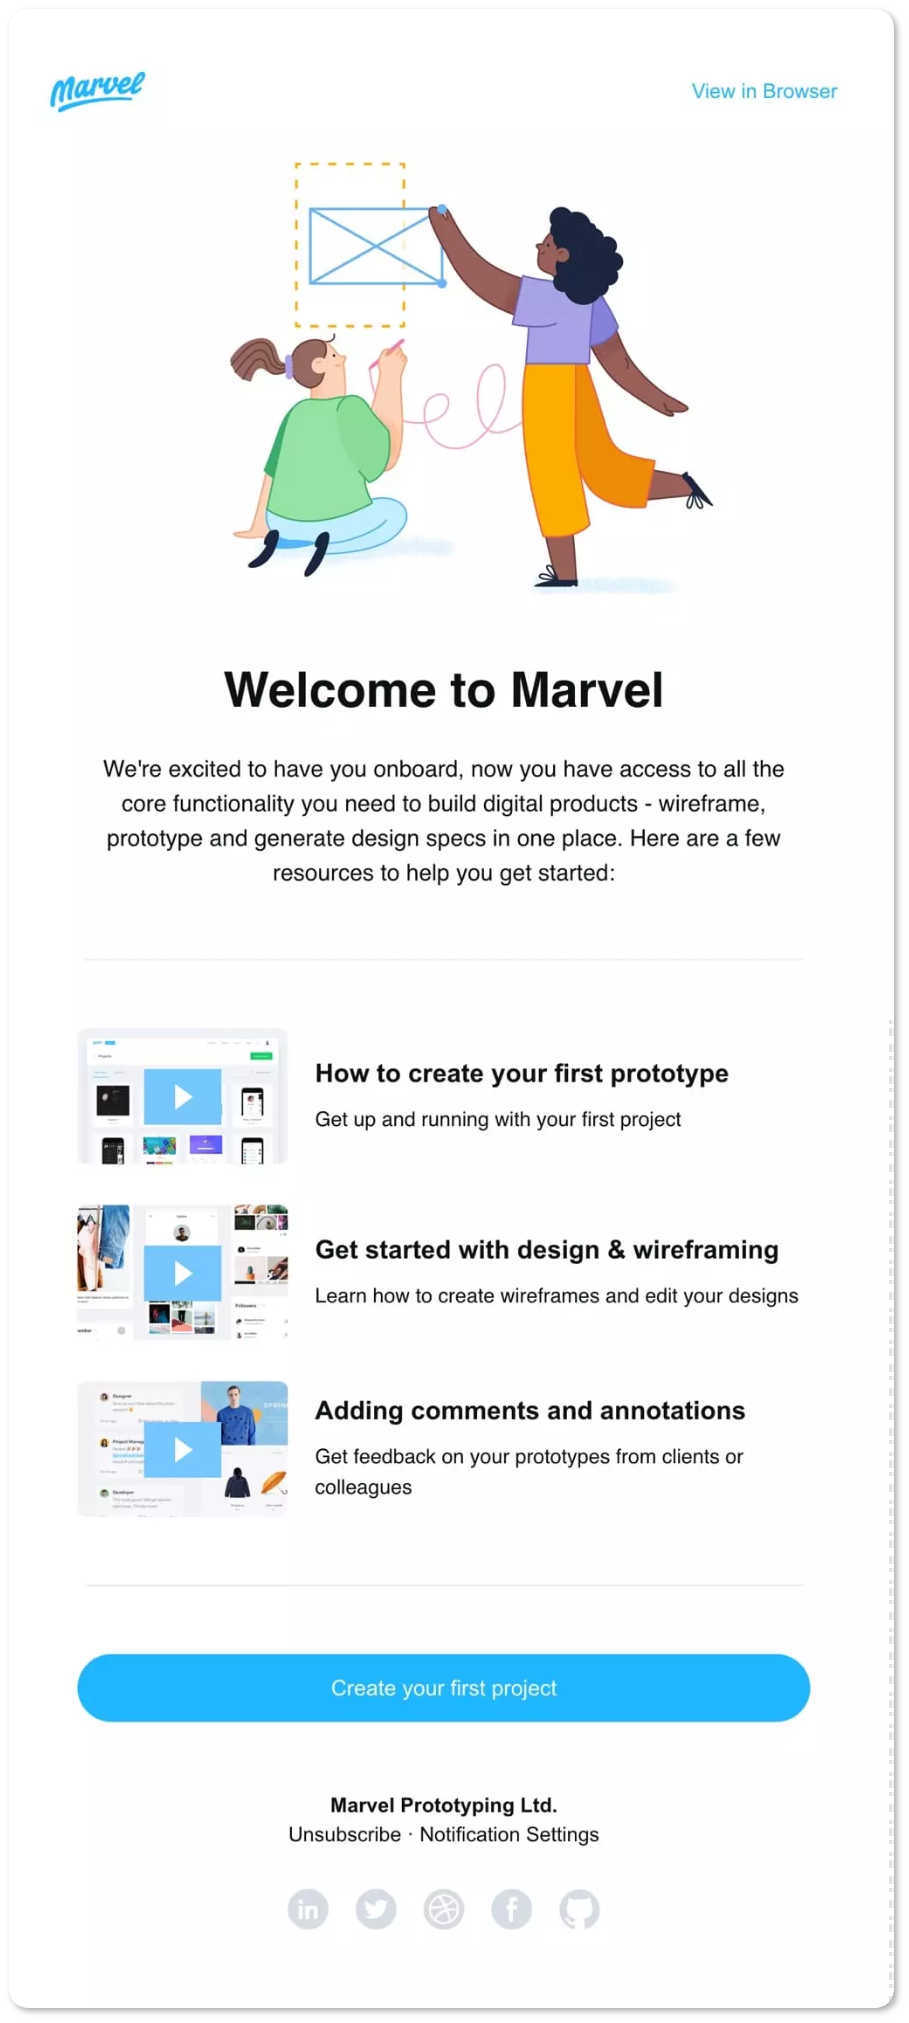 Product-focused welcome email